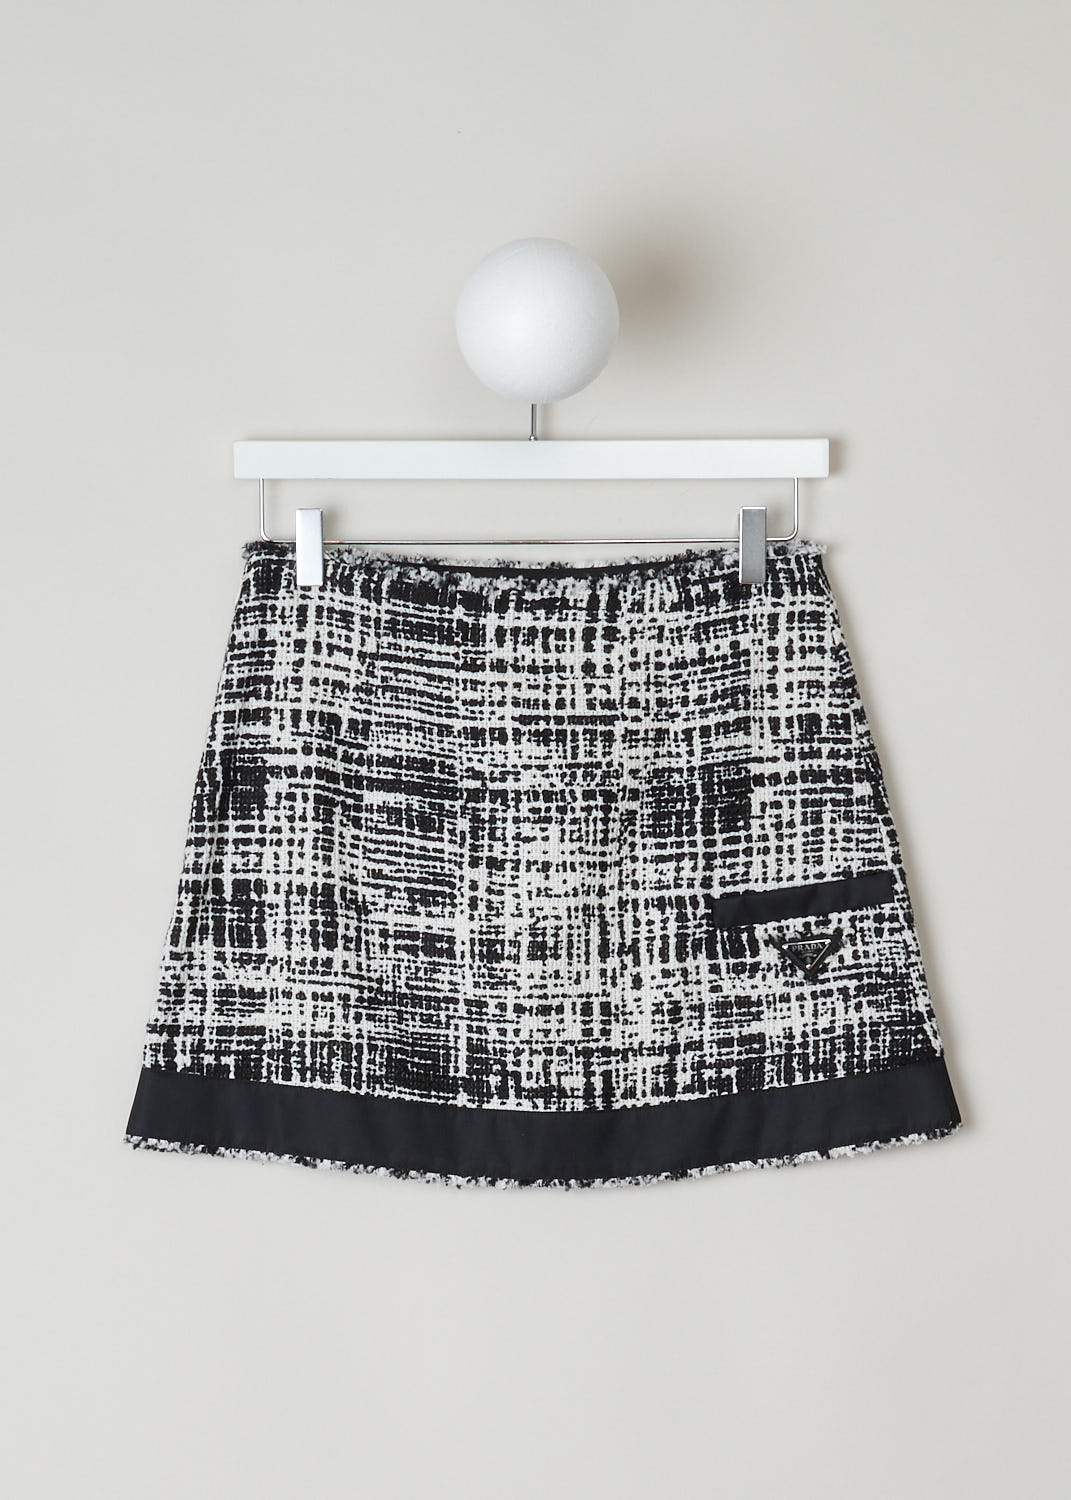 PRADA, BLACK AND WHITE TWEED MINI SKIRT, P164T_F0A72_03_TELONE_TWEED_RE_AVORIO_NERO, Black, White, Print, Back, This black and white tweed mini skirt has a concealed zip closure in the side seam. The skirt has a broad black trim along the hemline. In the back, the skirt has a single welt pocket with a black trim with underneath a black and silver logo plaque. The skirt is fully lined. 
